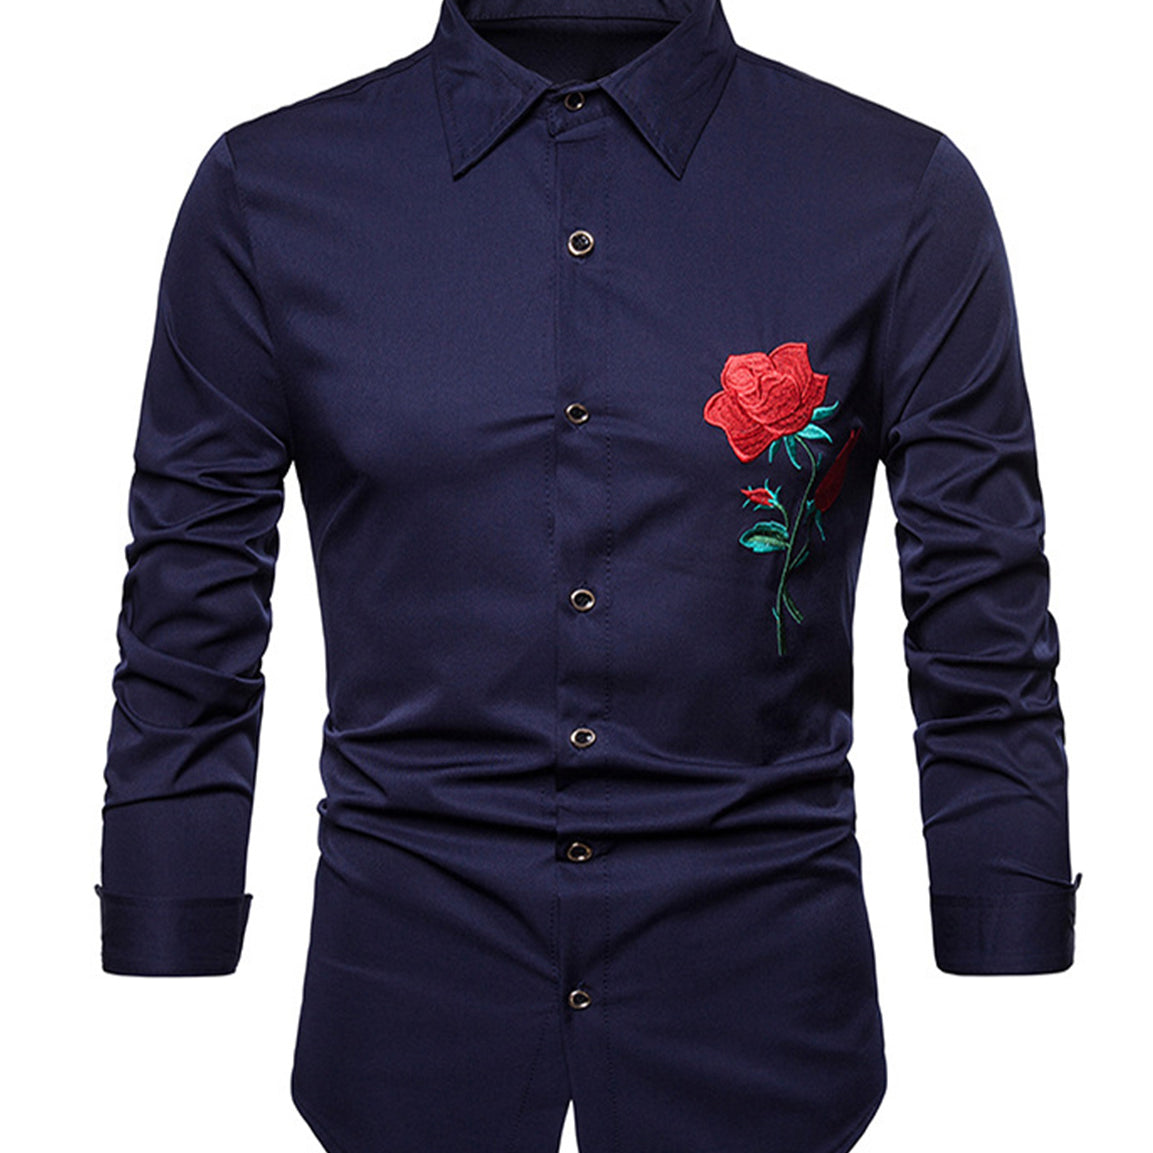 Men's Rose Embroidery Casual Long Sleeve Button Dress Shirt